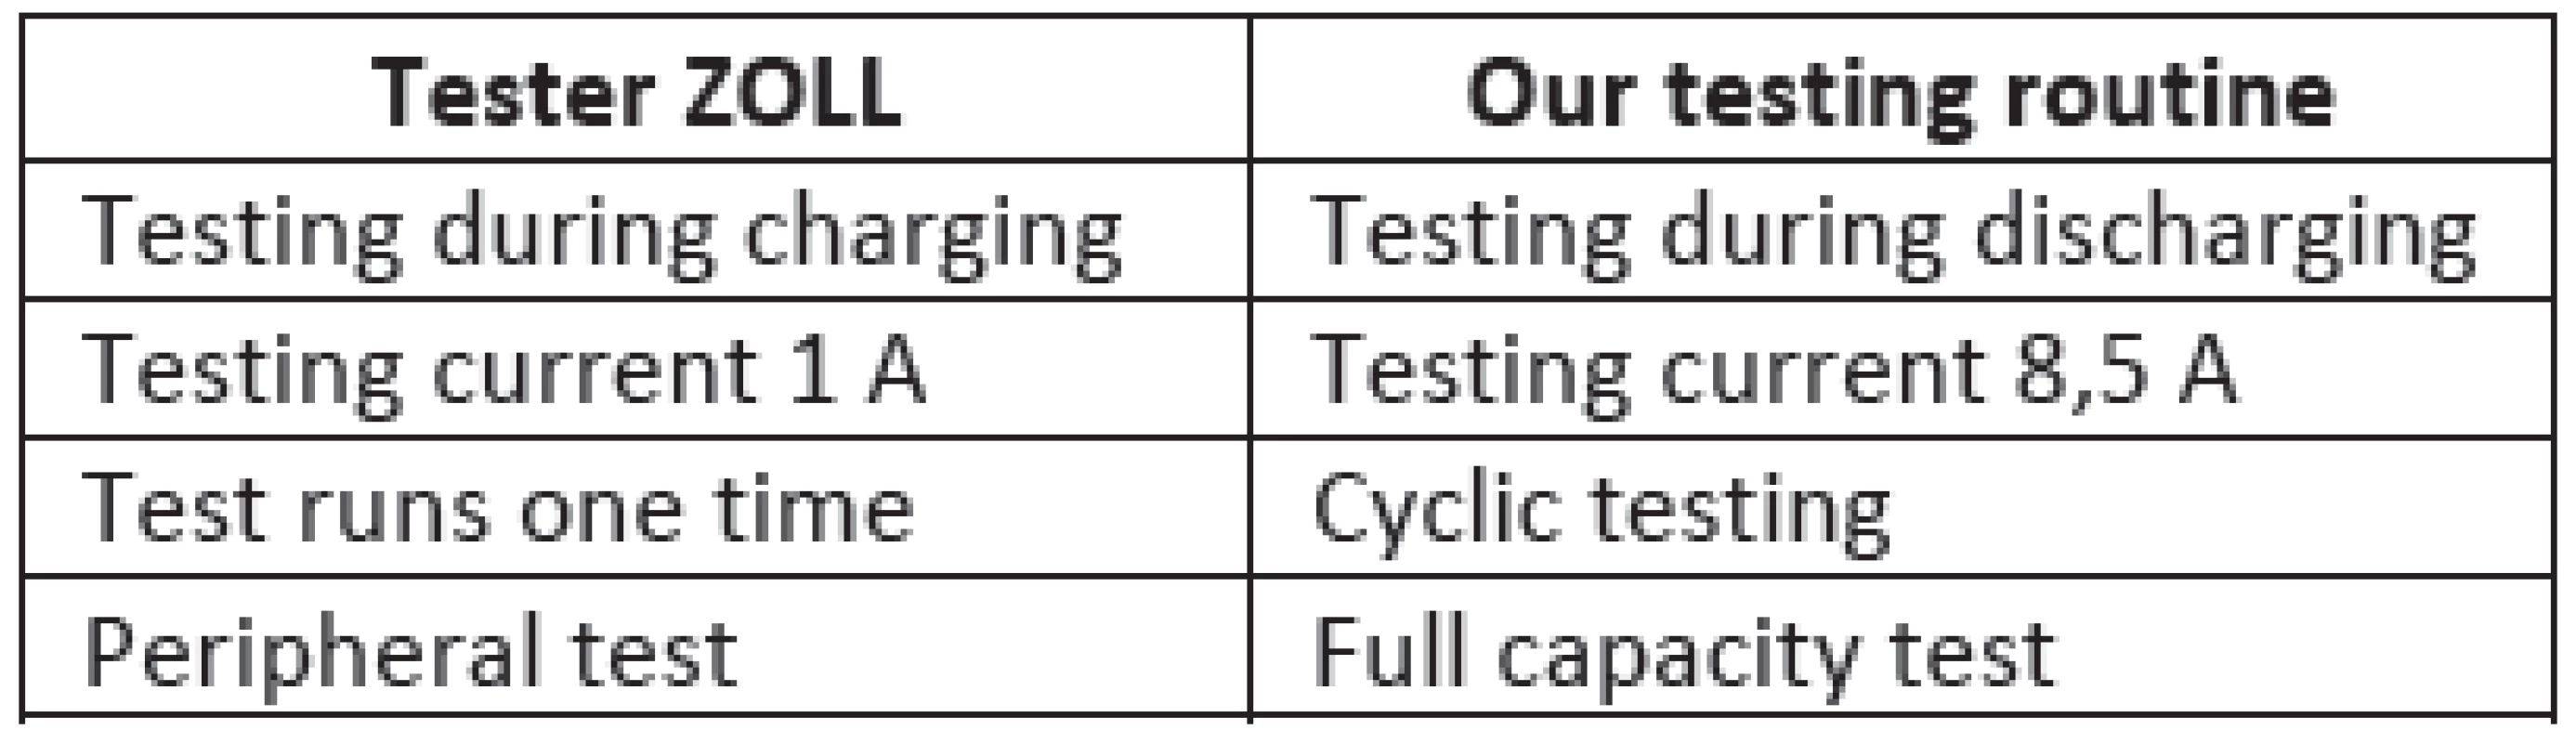 The comparison between ZOLL tester and our testing routine for lead-acid acu-pack ZOLL.